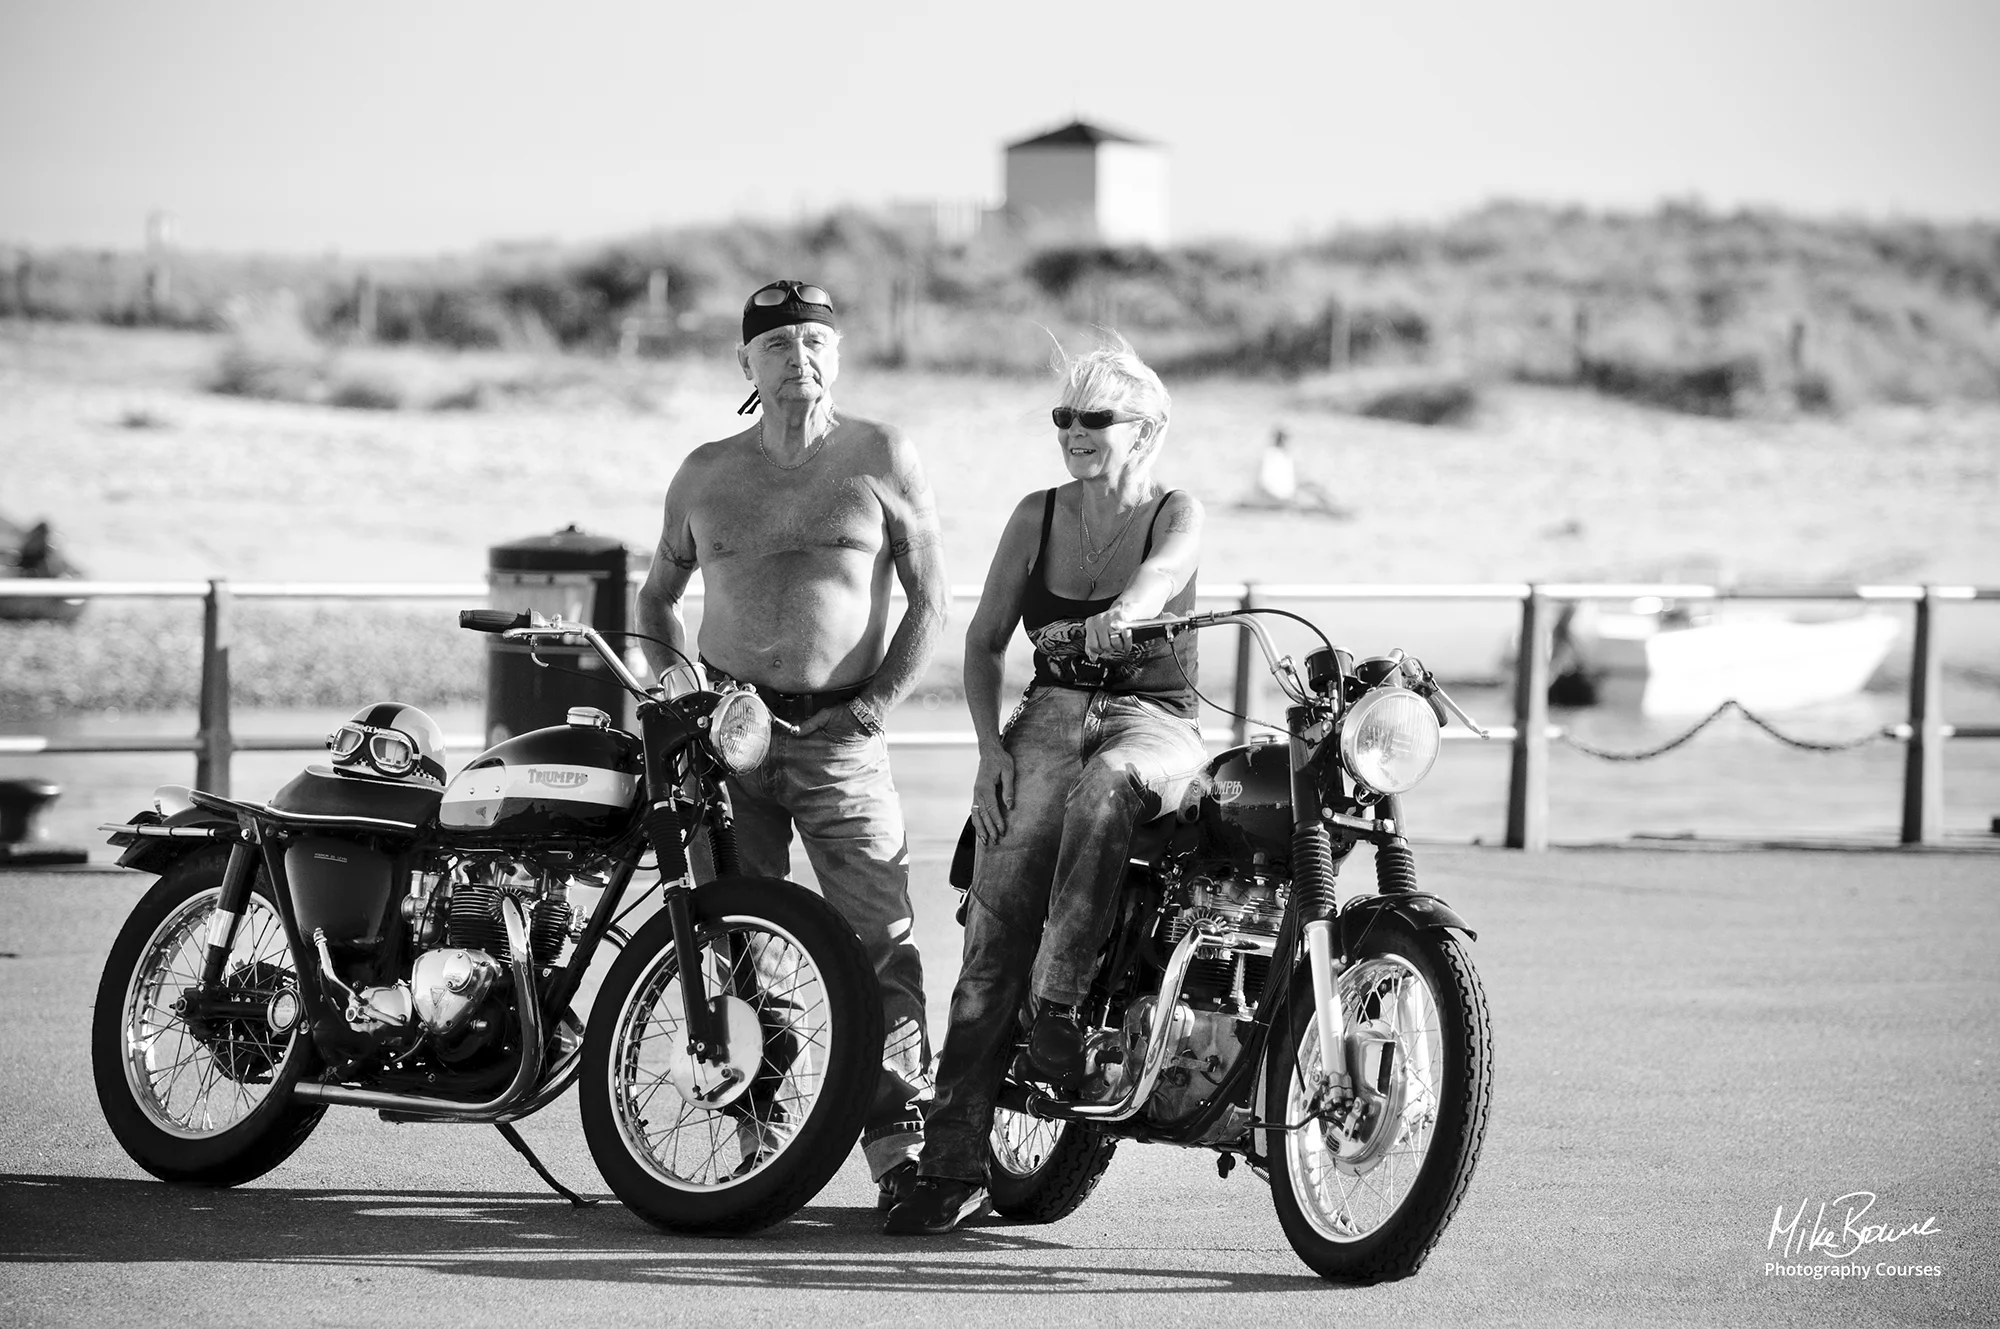 Older man and woman posing with vintage motorcycles by a beach